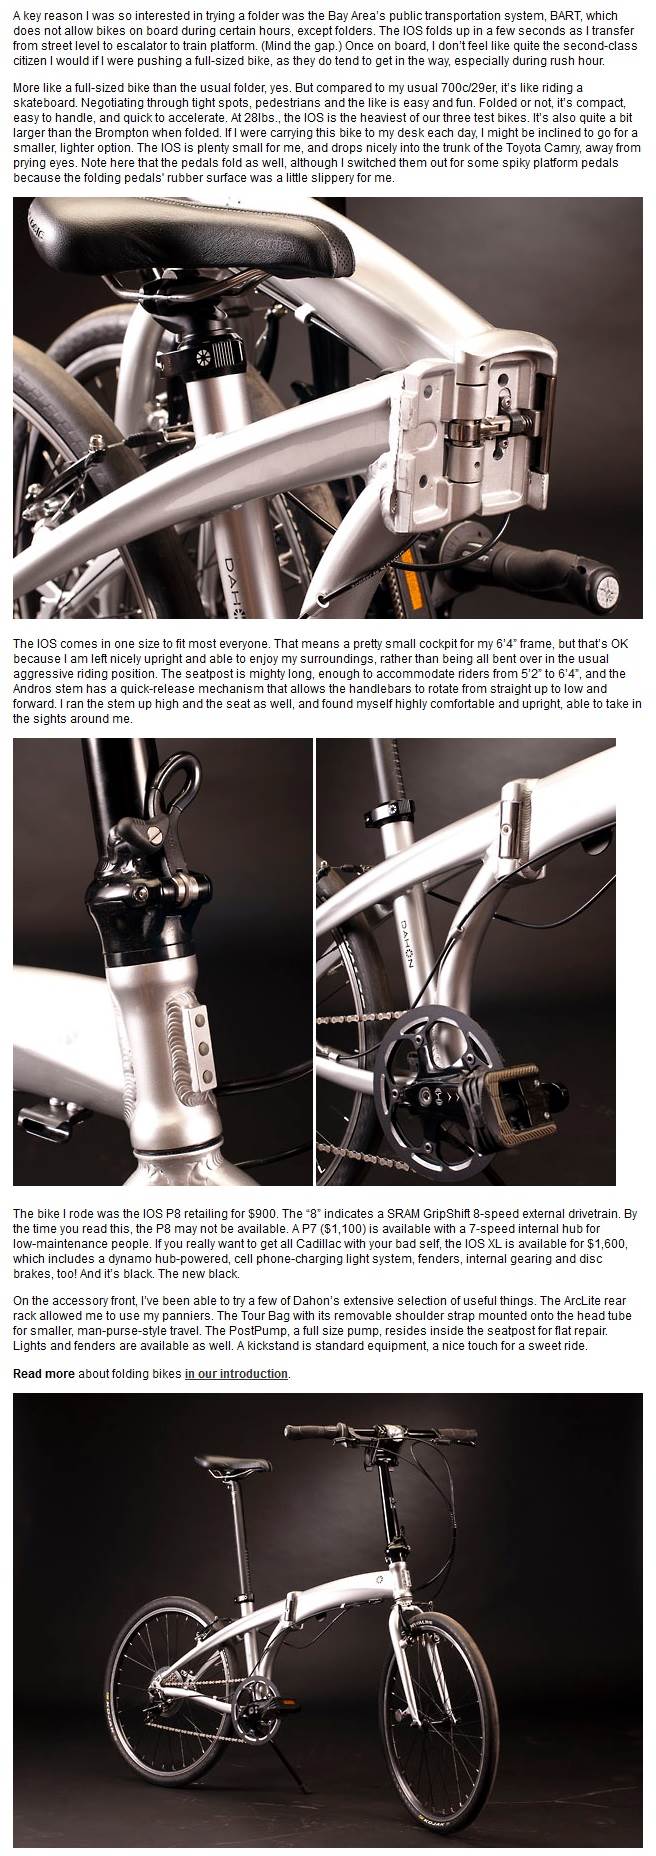 Dahon Ios P8 reviewed in Bicycle Times